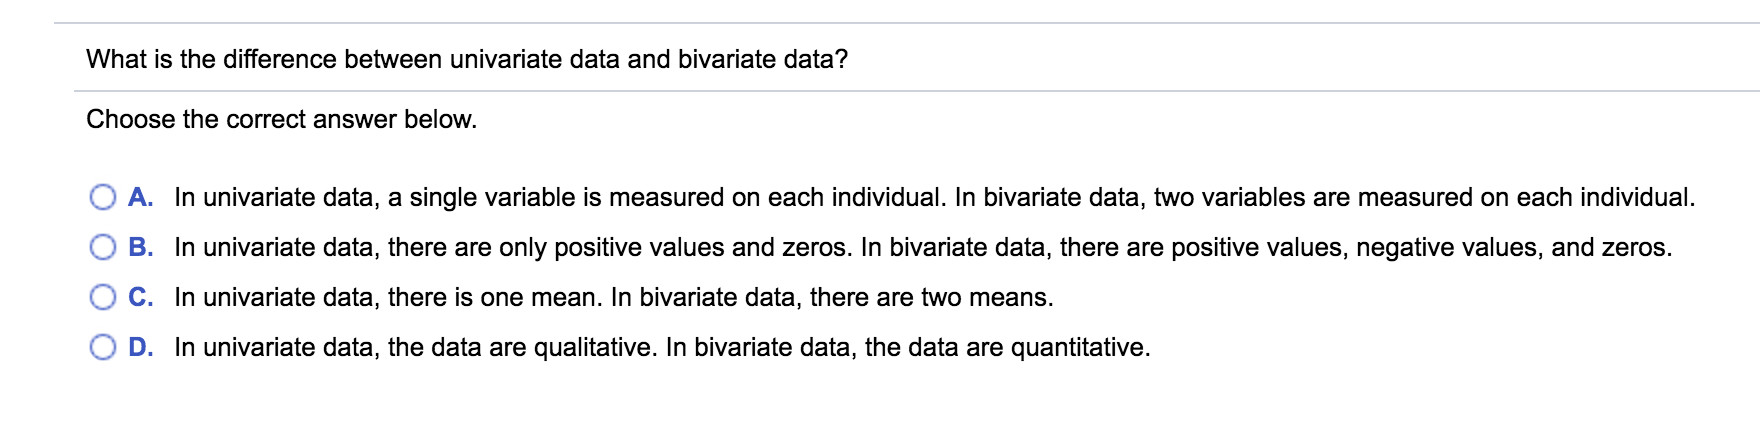 What is the difference between univariate data and bivariate data?